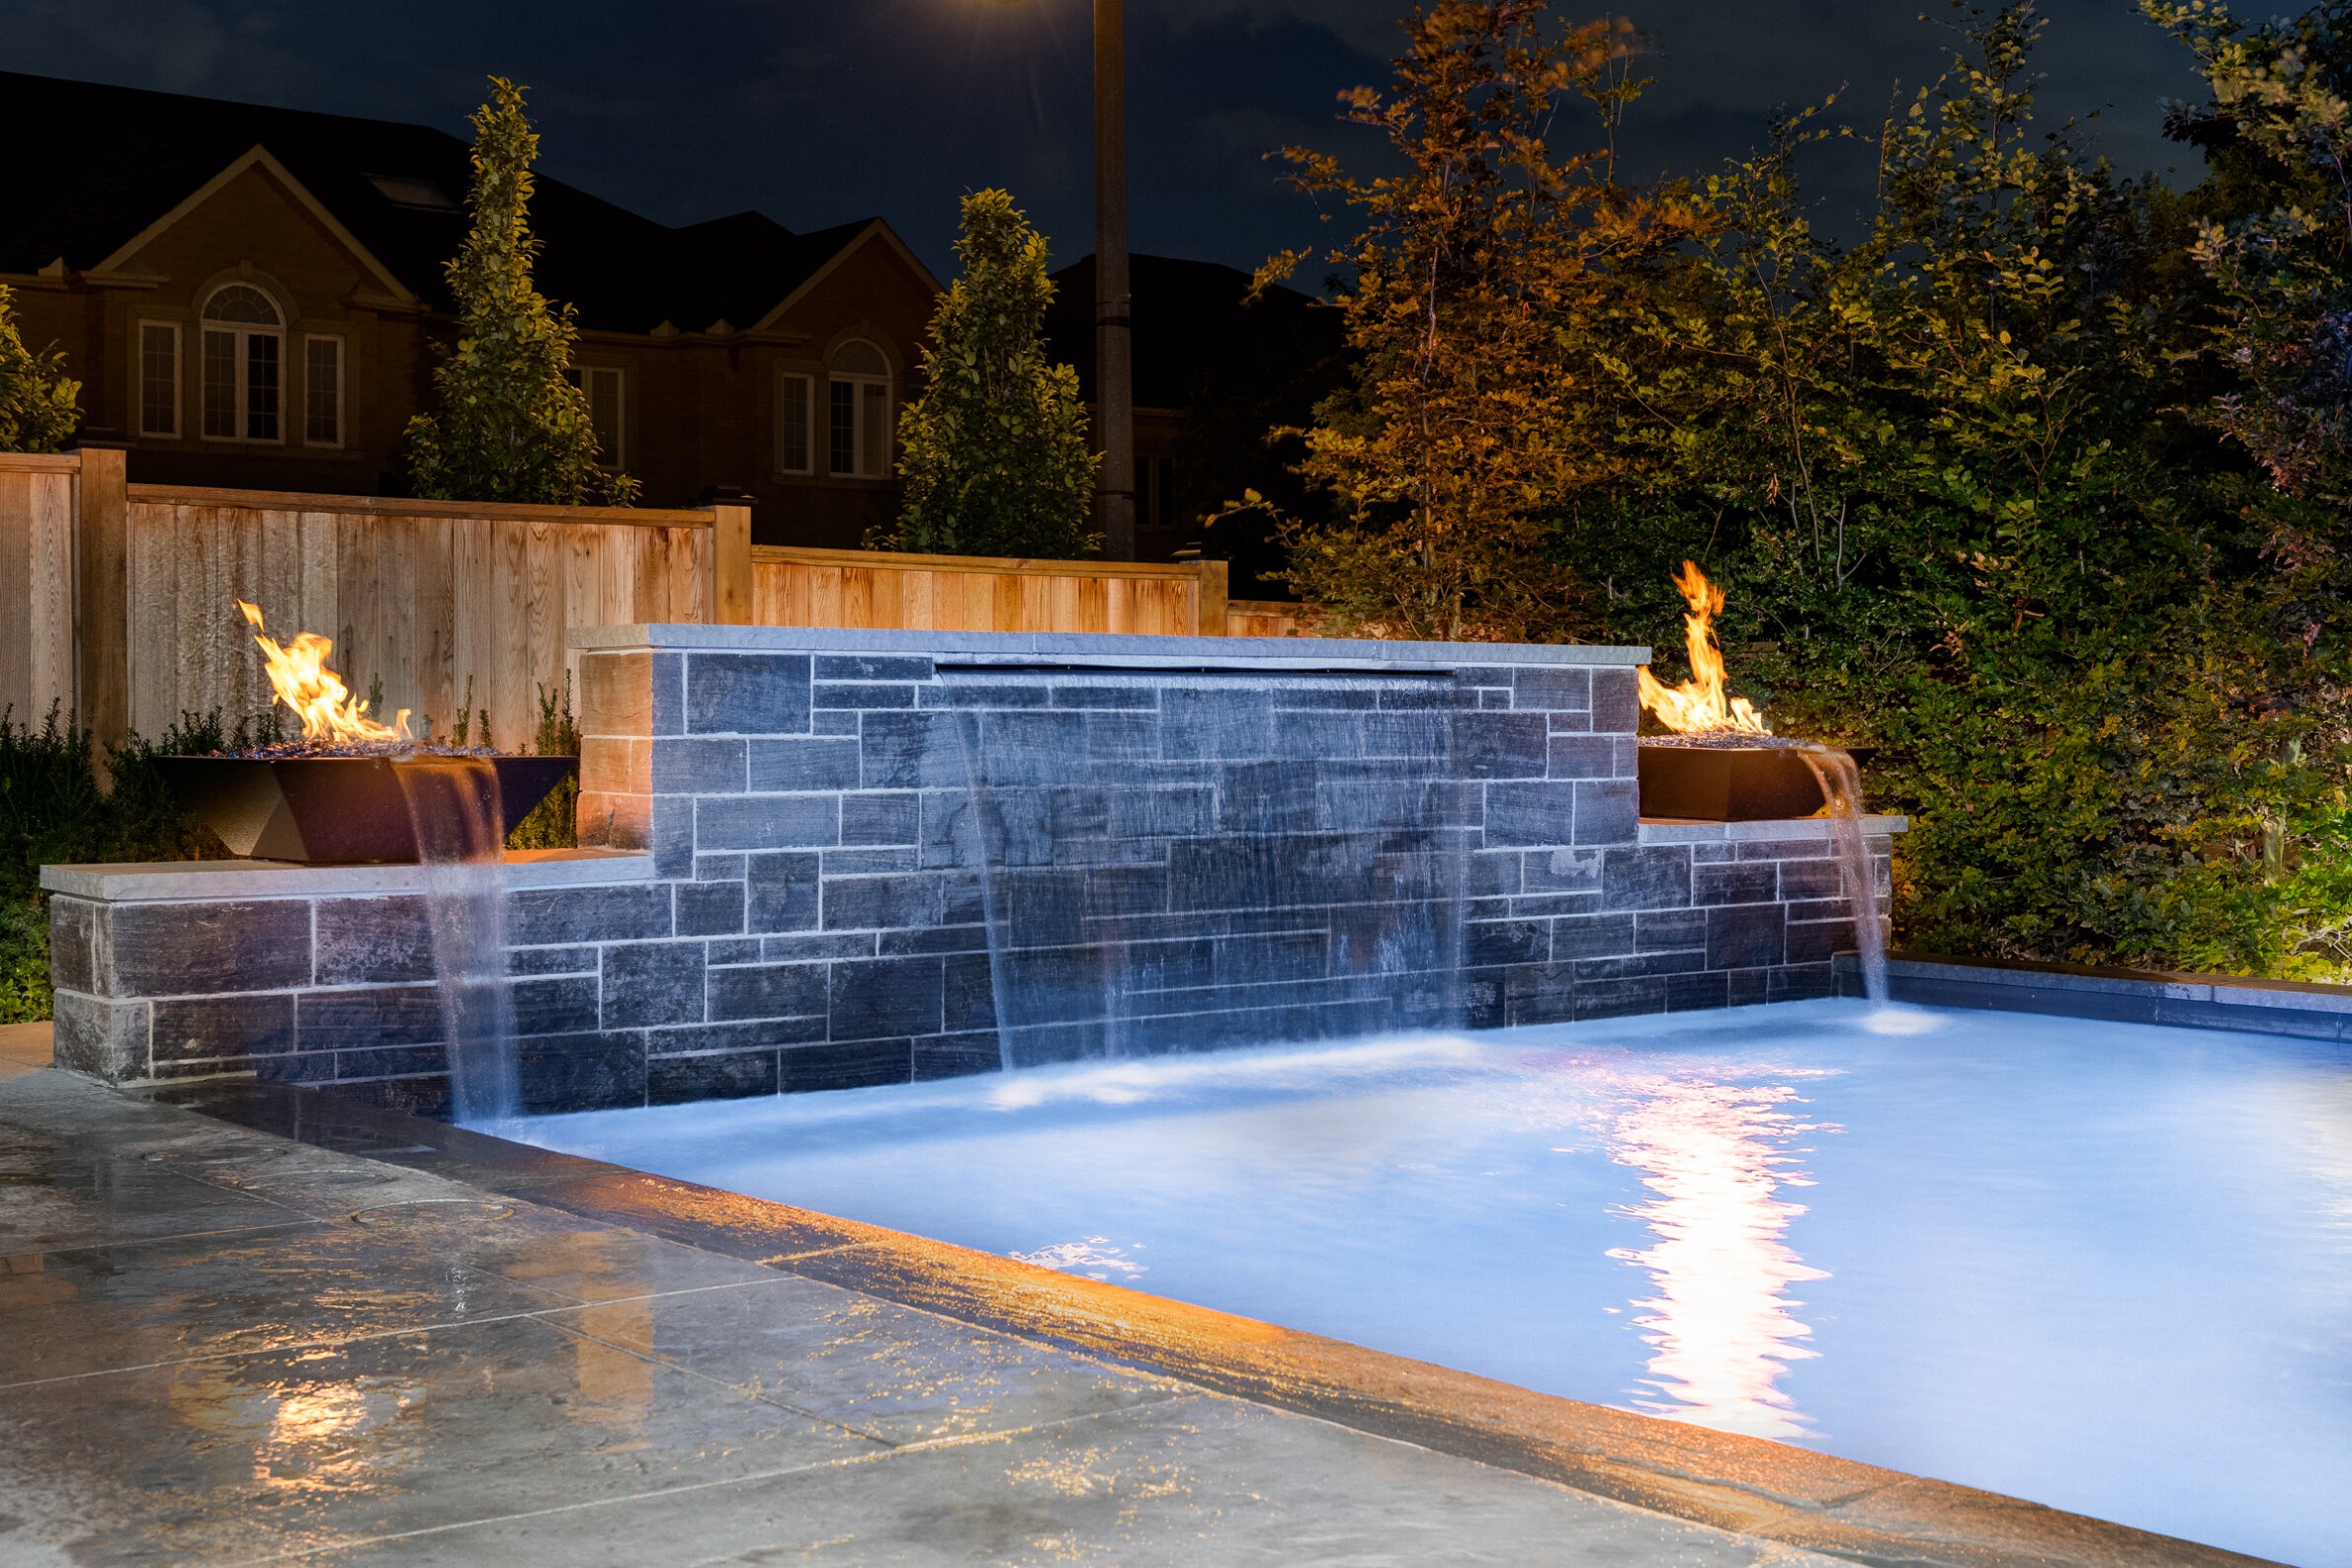 An outdoor pool with a dark stone waterfall feature, and two fire pits glowing at night, surrounded by wooden fencing and greenery.